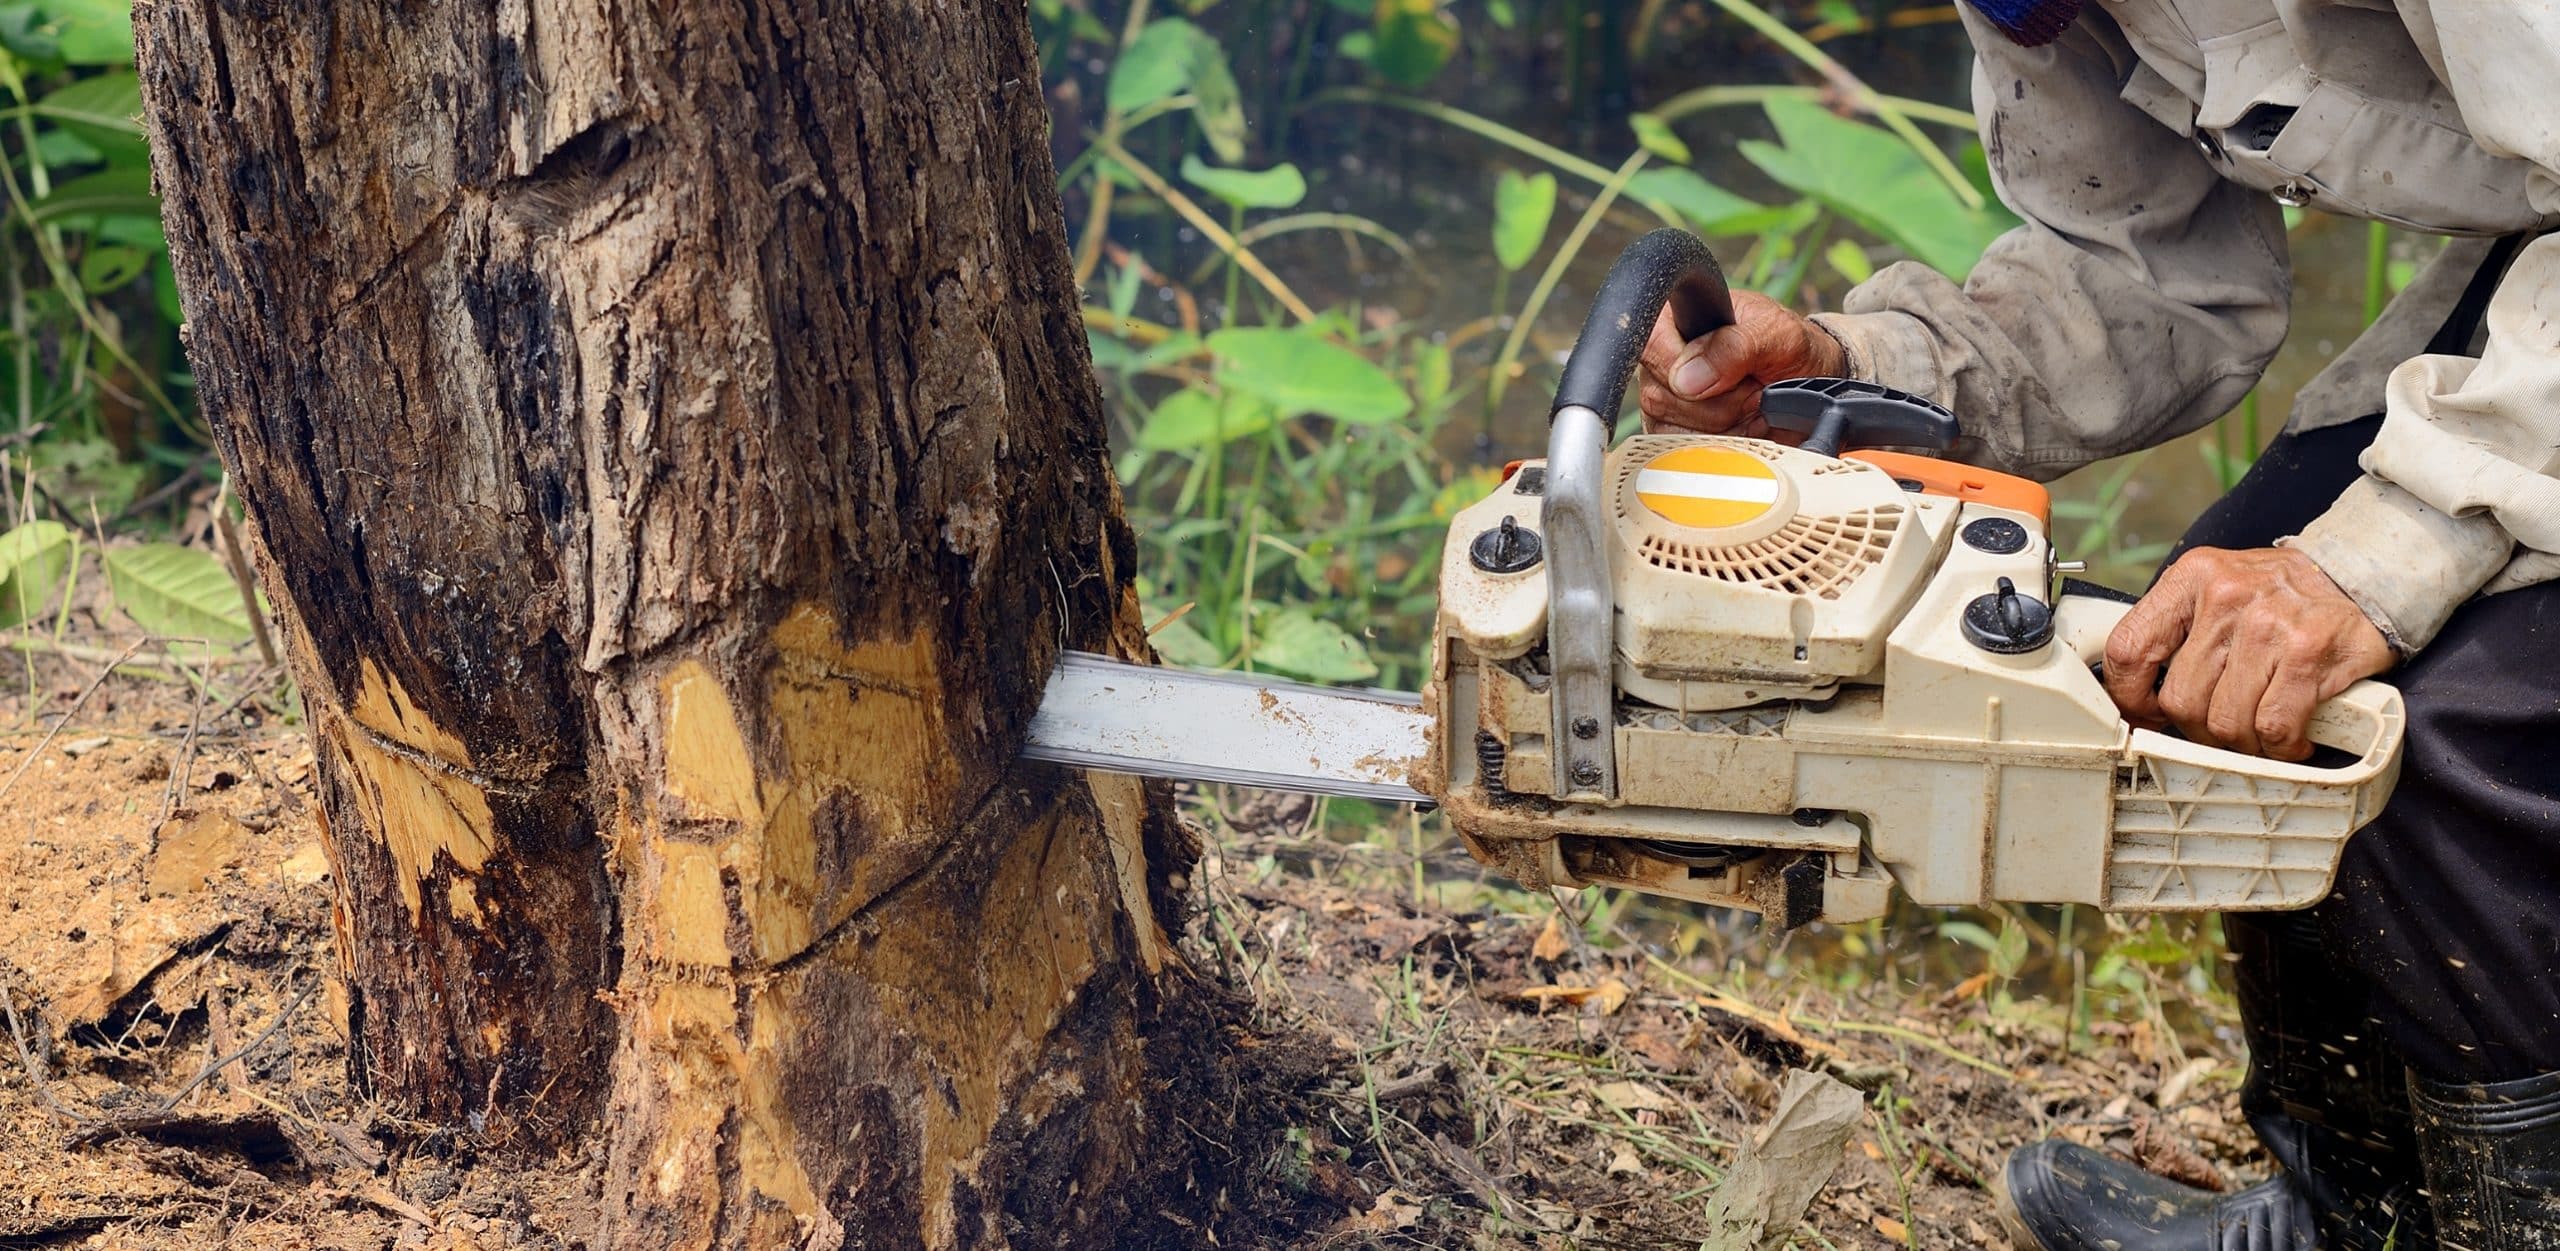 Worker cutting a tree down with a chainsaw